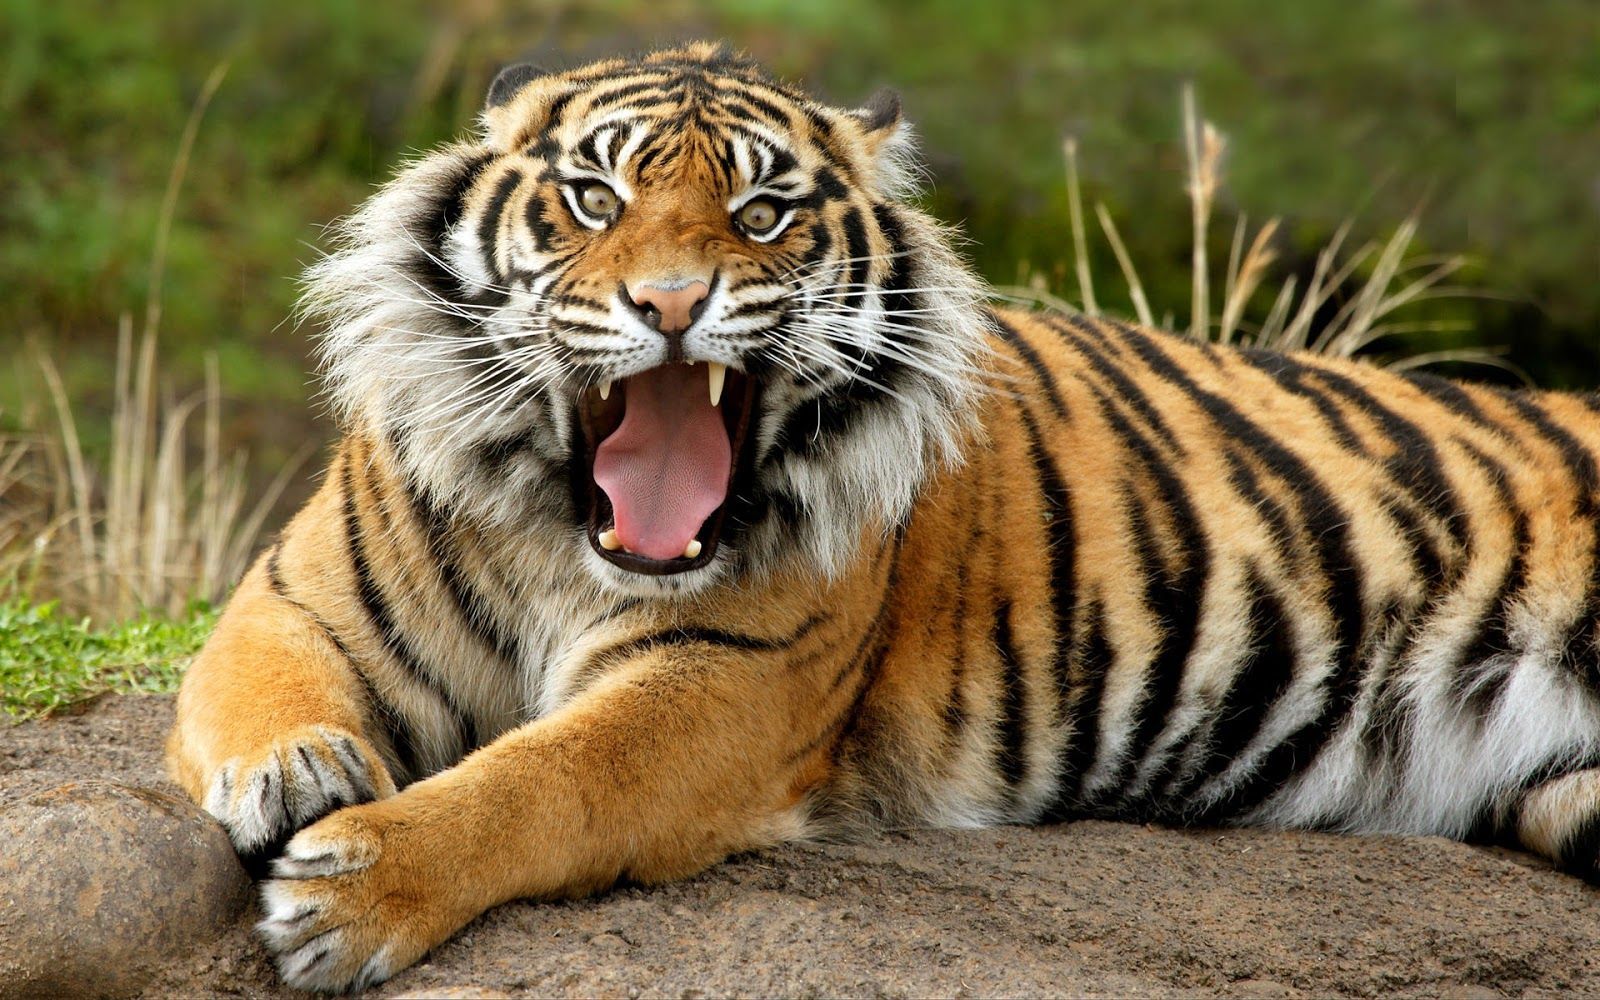 Wildlife of the world tiger desktop wallpapers hd 1386282547 org